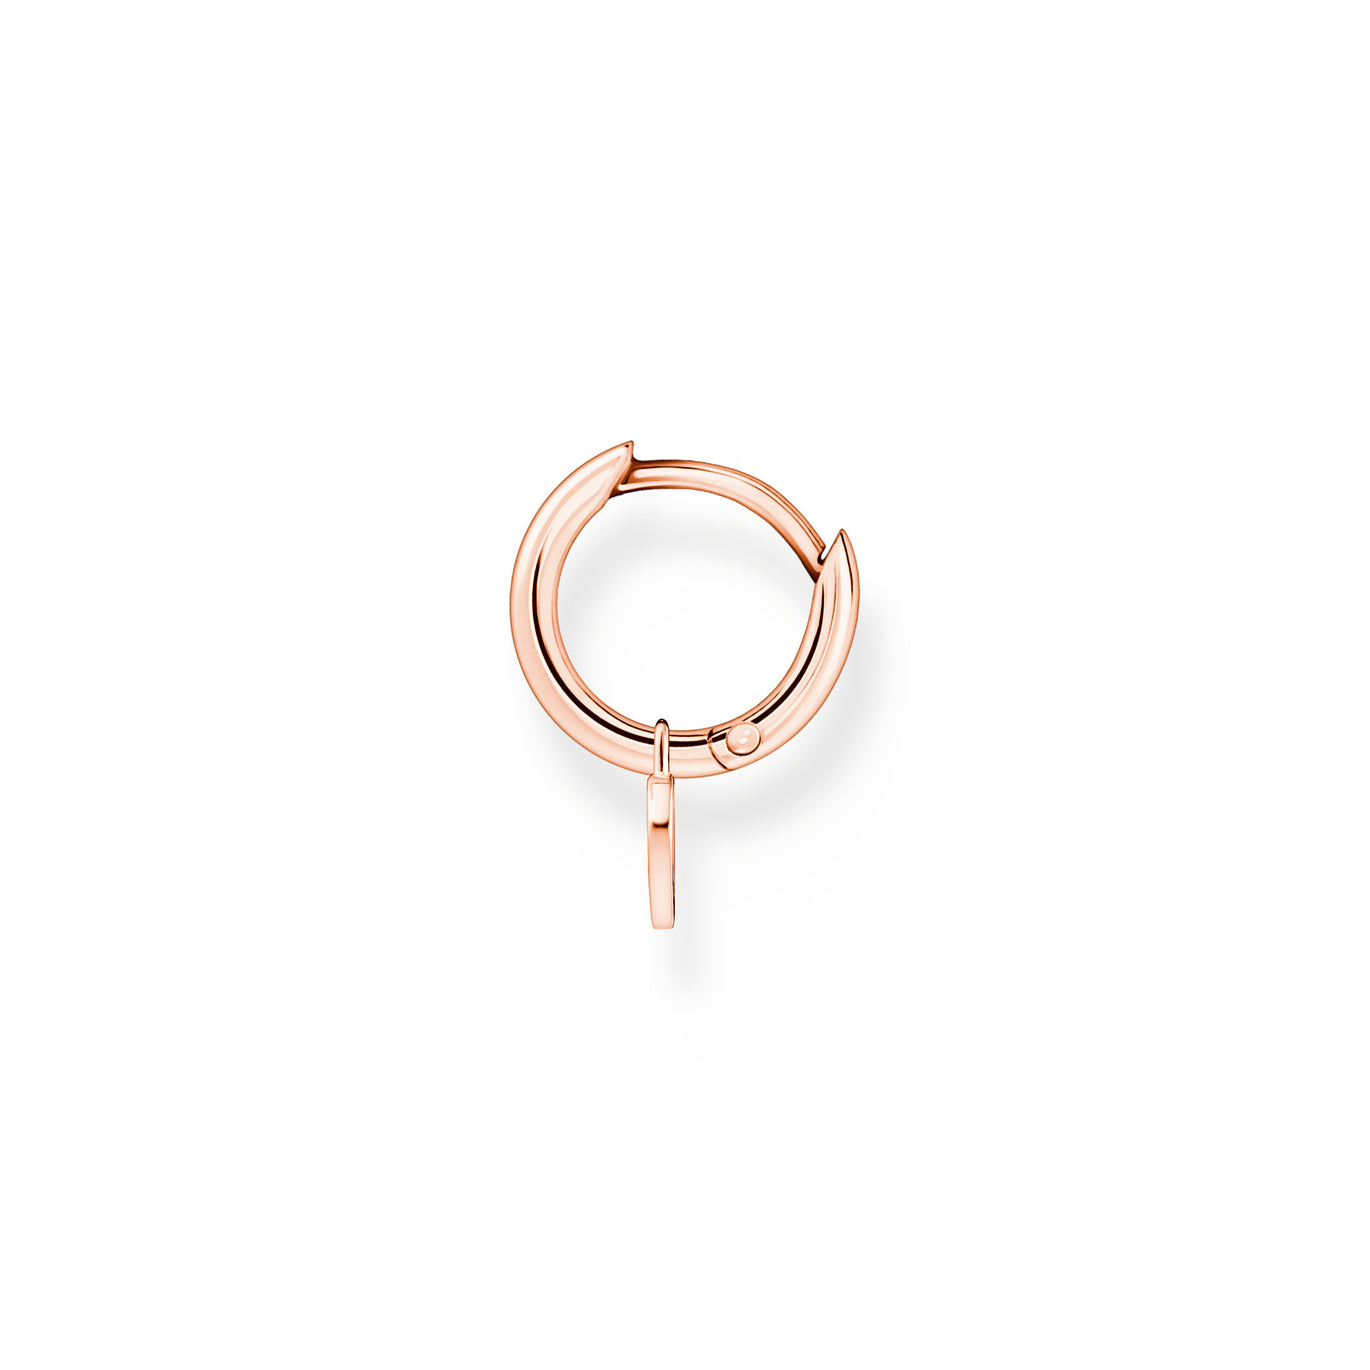 Thomas Sabo Rose Gold Single Hoop Earring with Heart